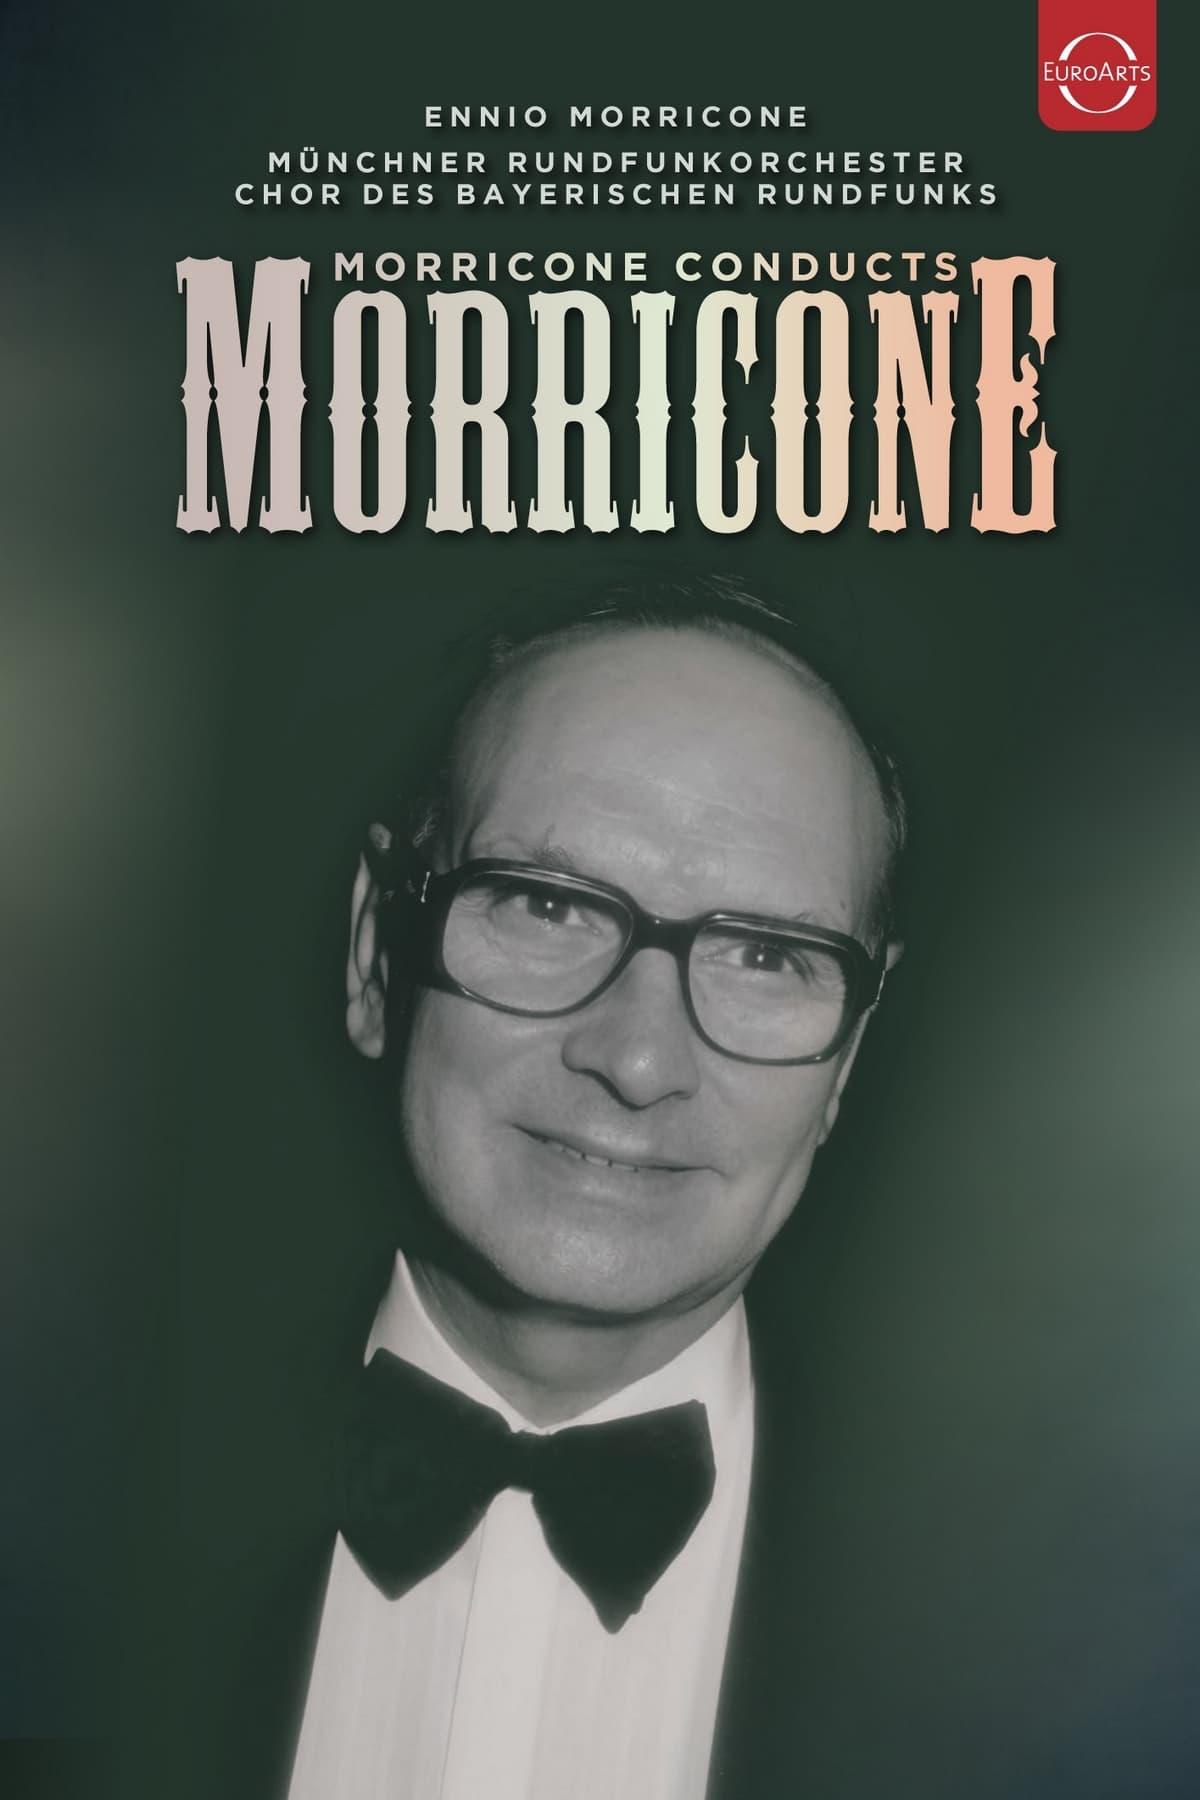 Morricone Conducts Morricone poster